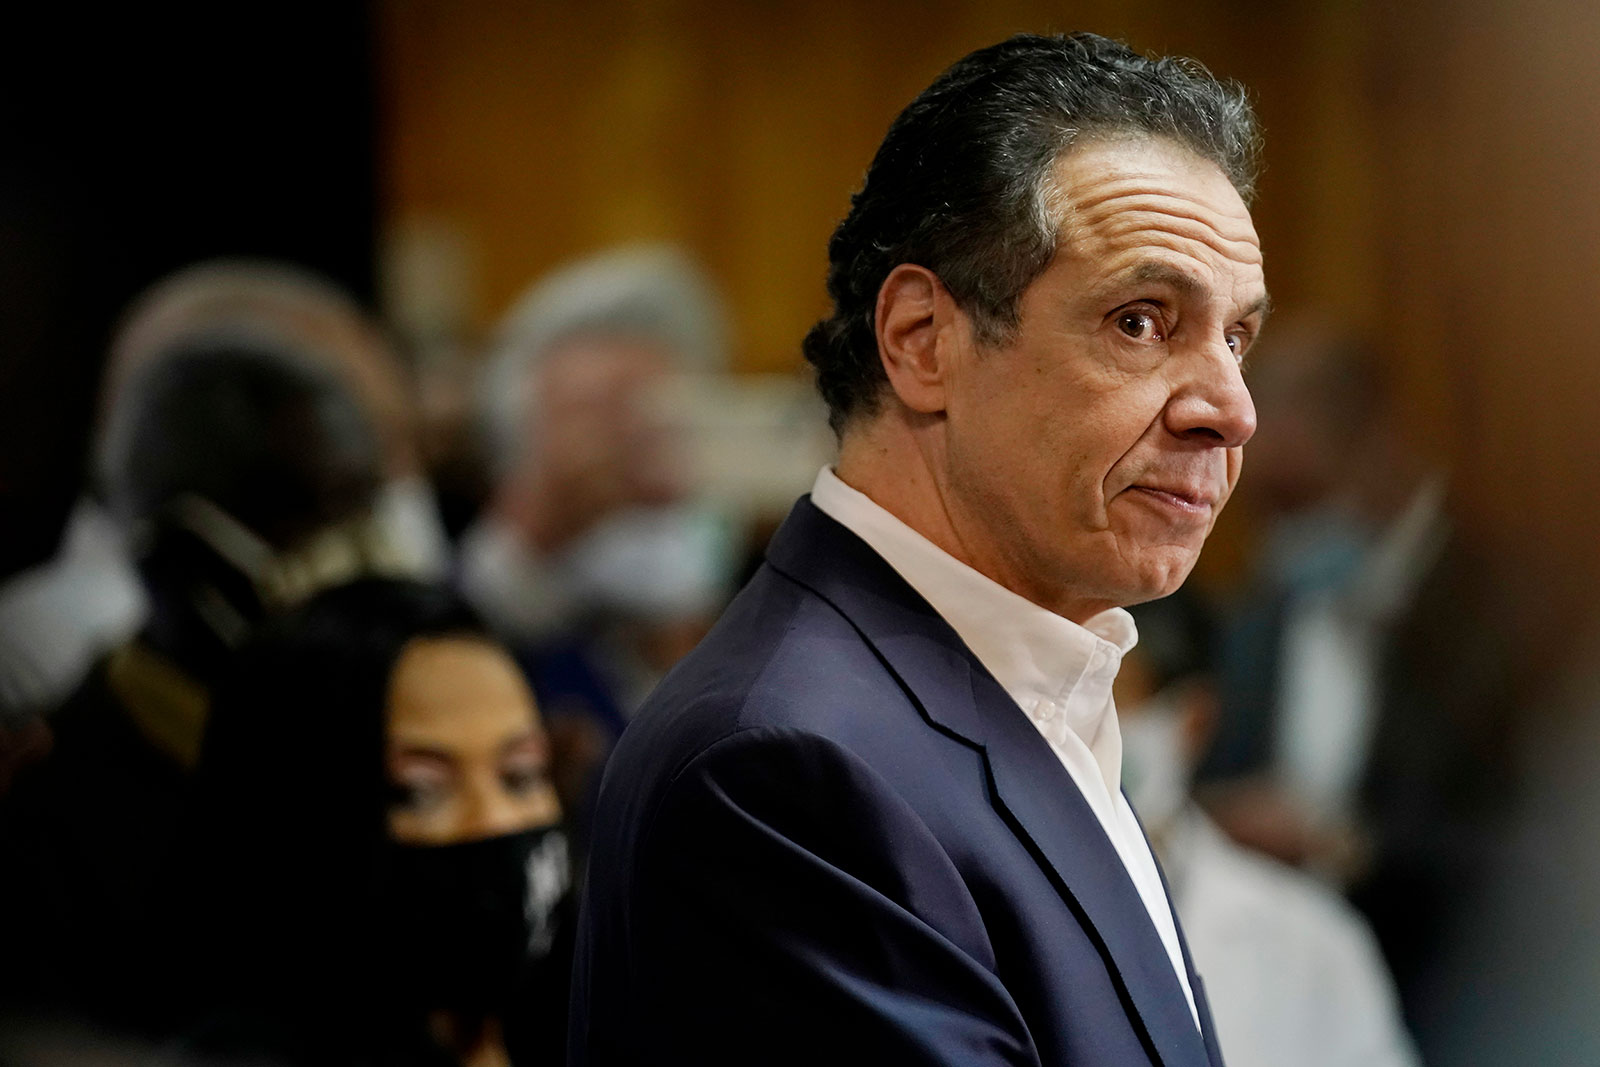 New York Governor Andrew Cuomo Resigns After Harassment Claims The World Other Side